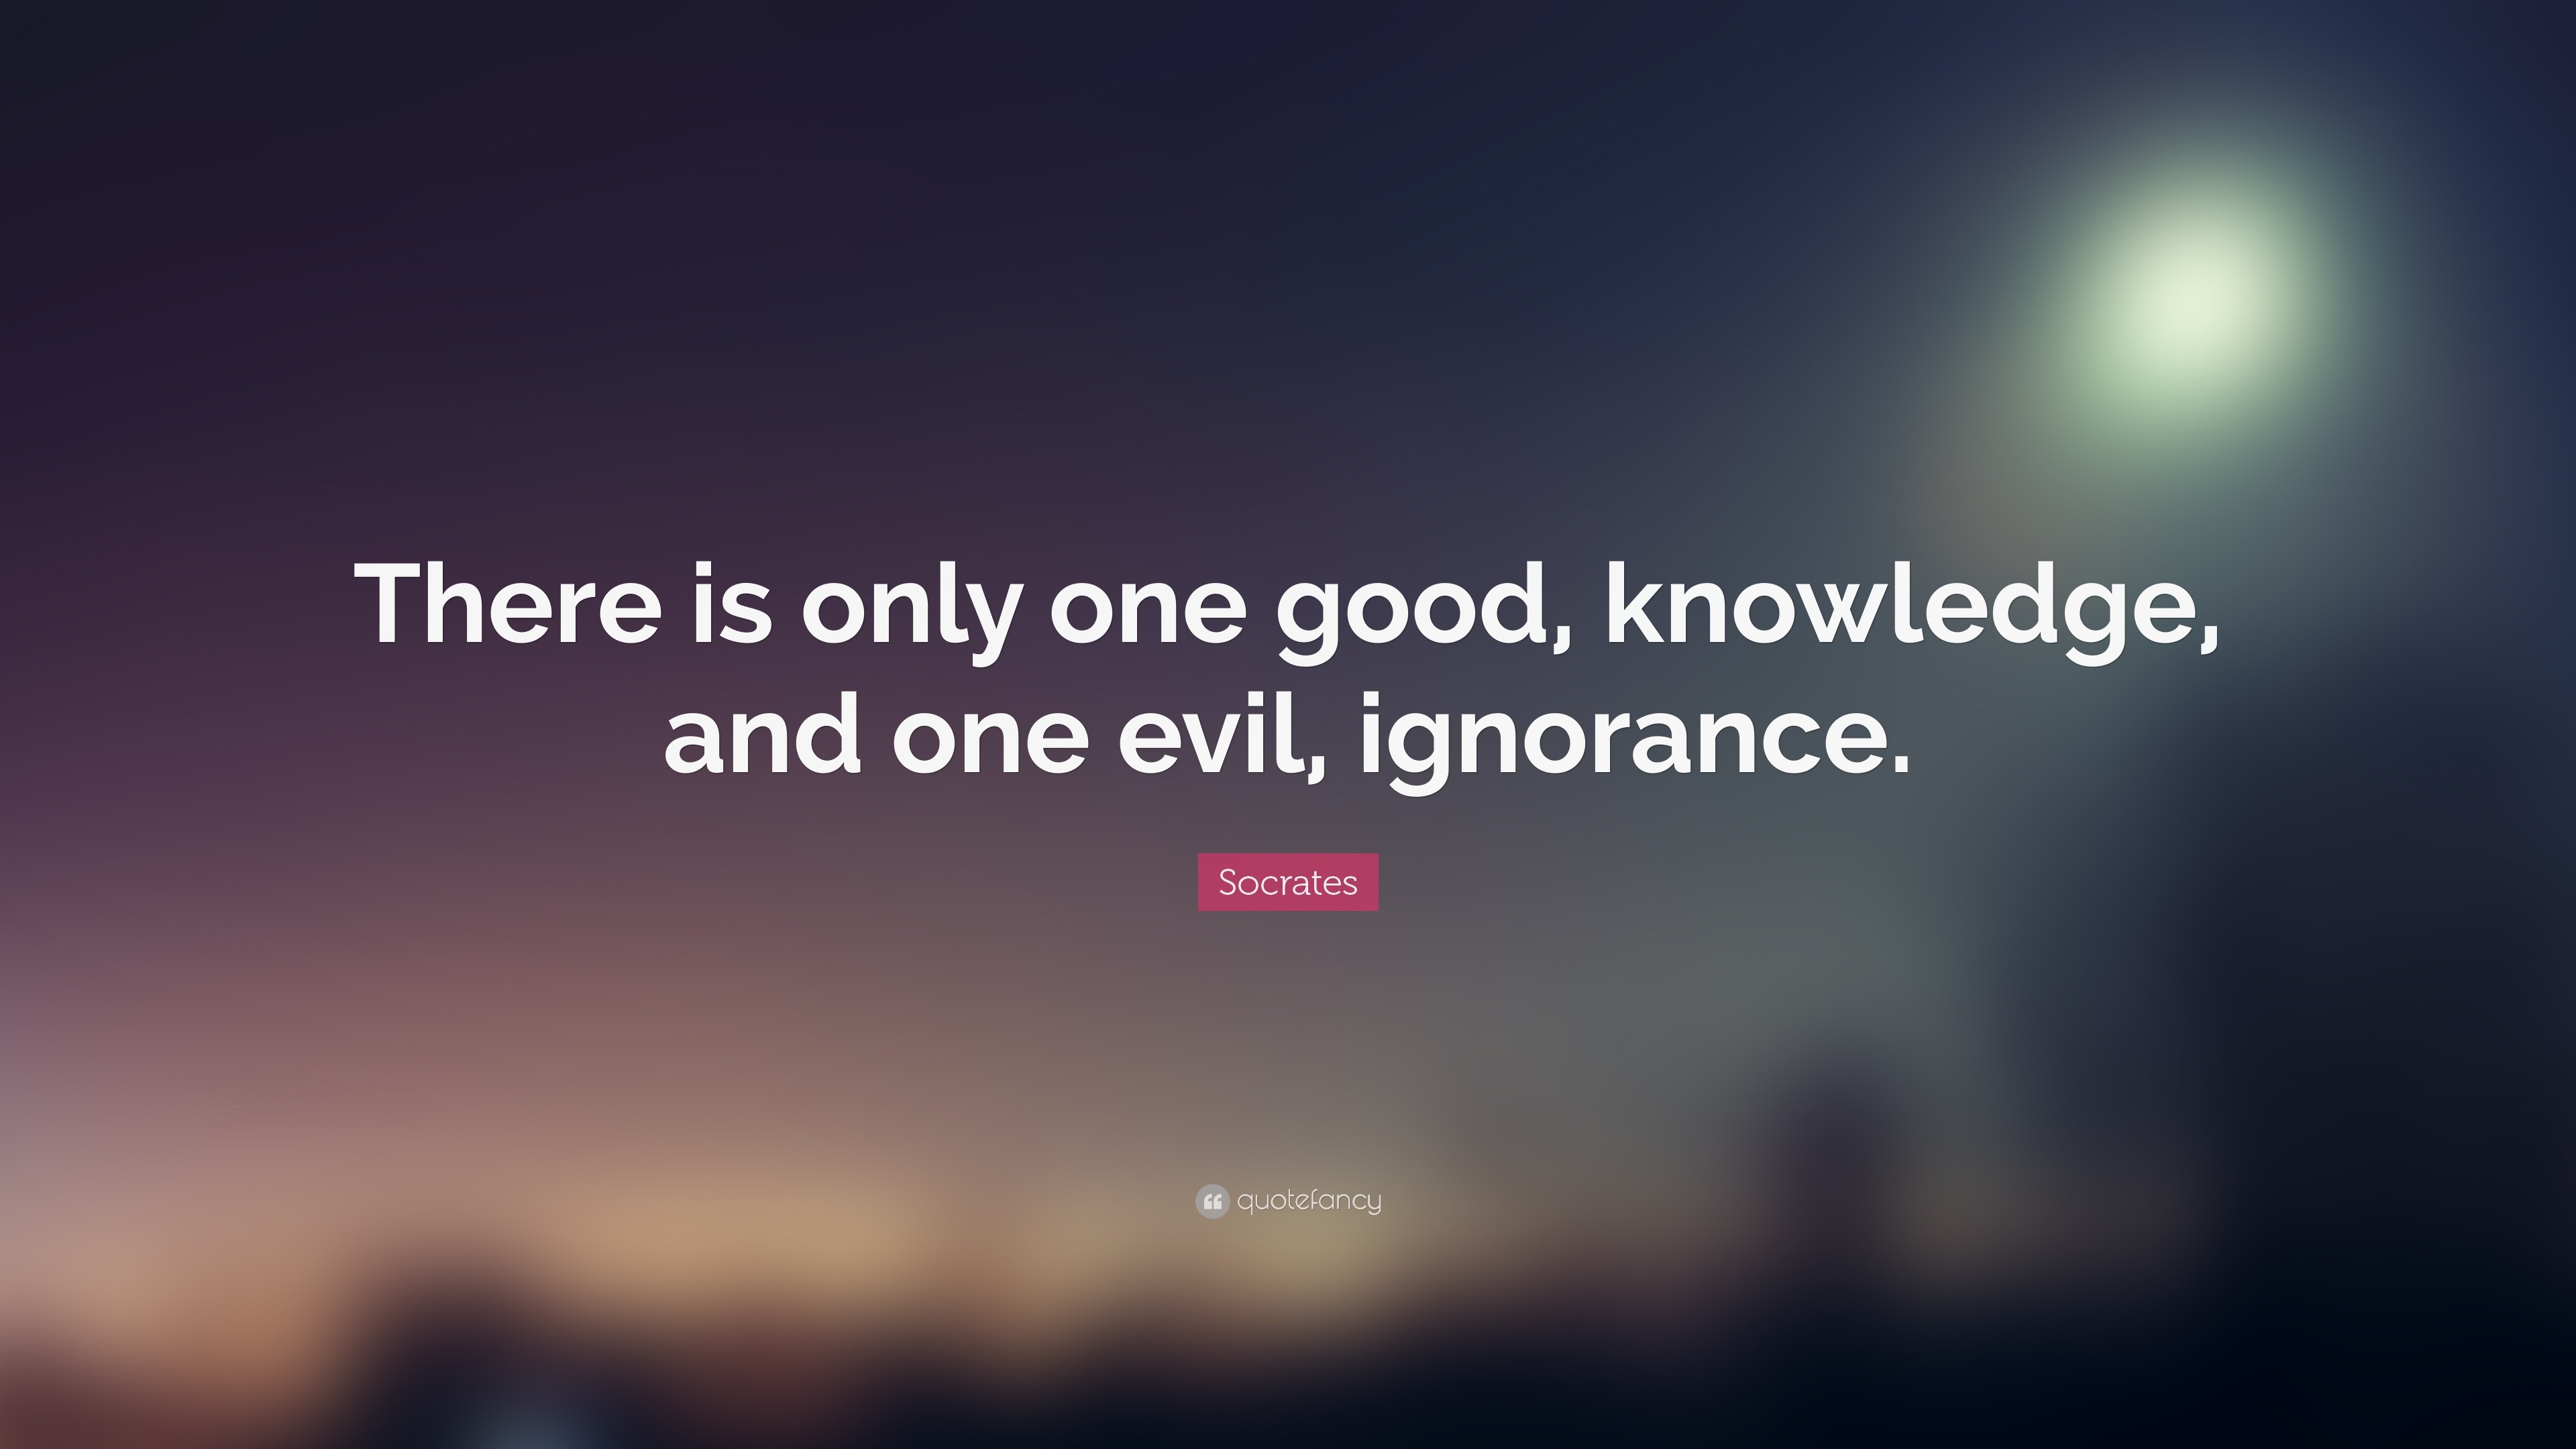 Socrates Quote “There is only one good knowledge and one evil